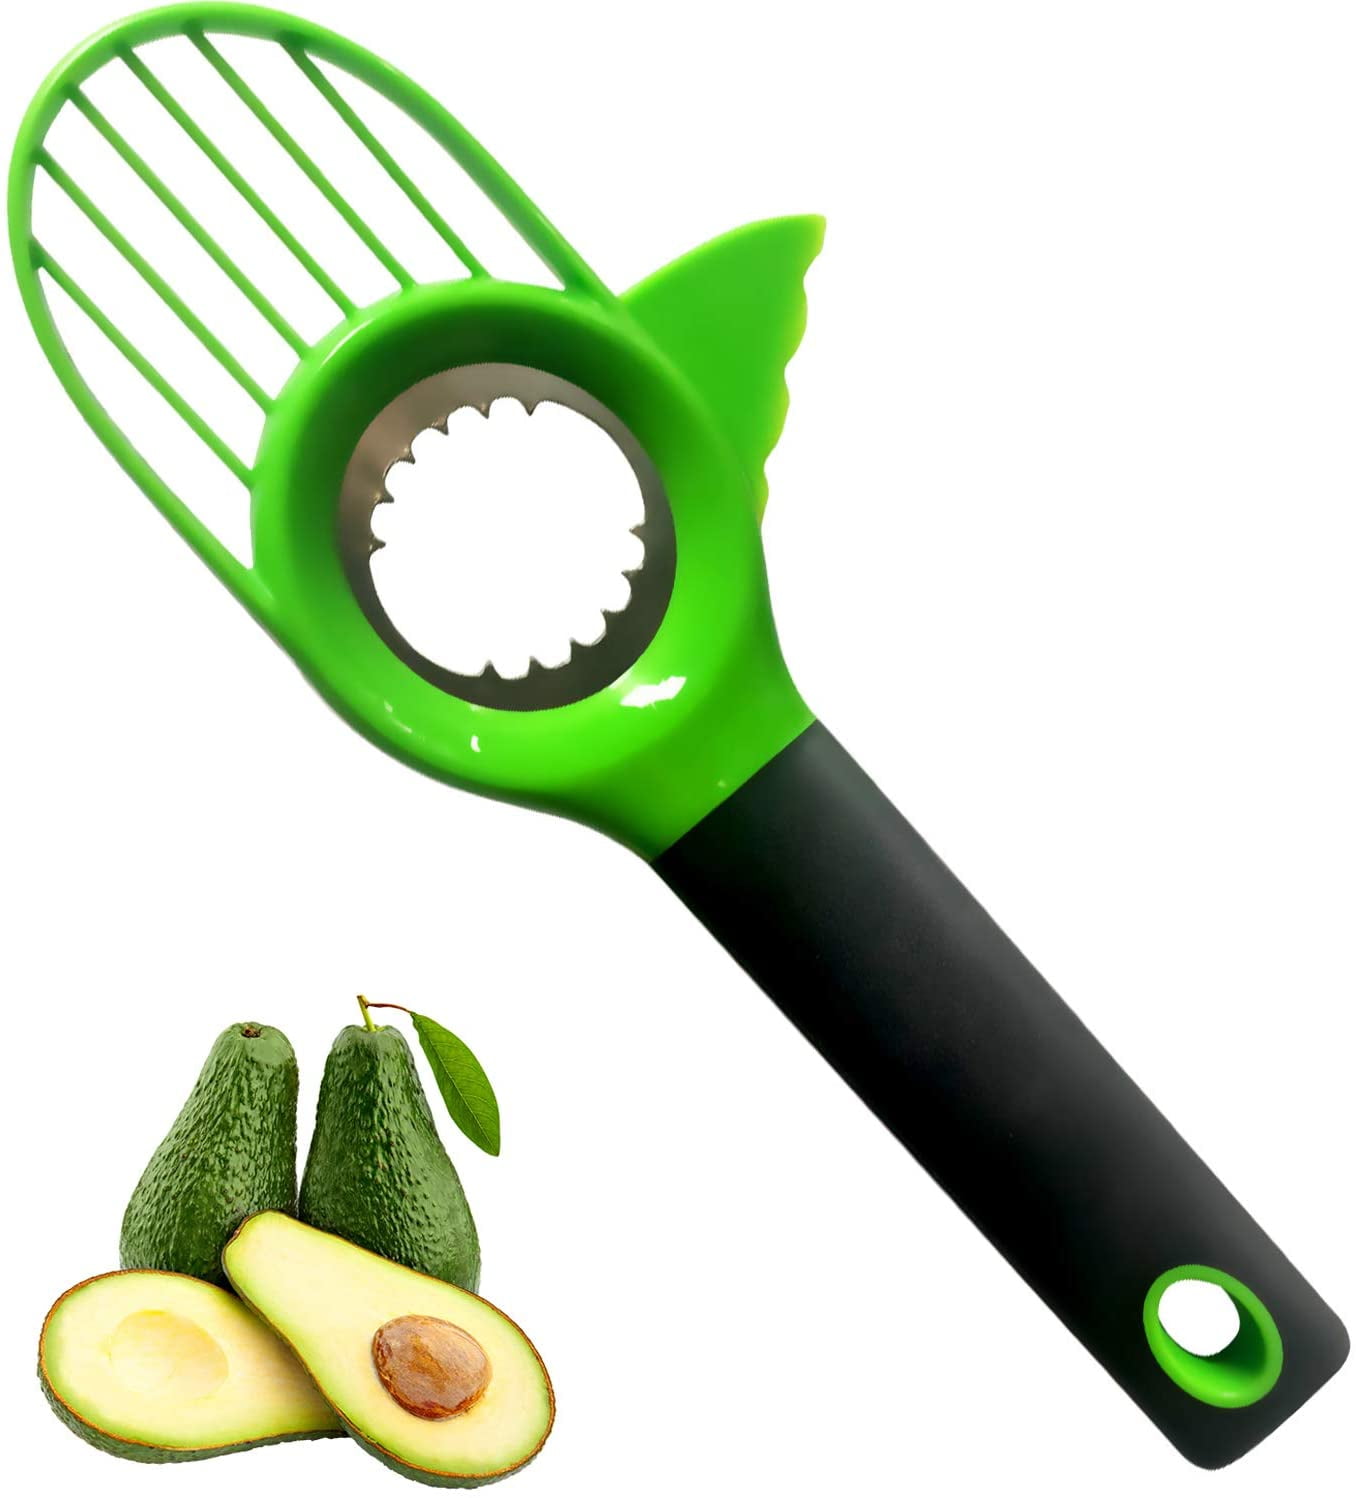 Well Made Pitter Tool Stainless Steel Avocado Pit Remover Cutter/Peeler Really Cutting Thin Slices Ergonomic Handle with Non-Slip Avocado Slicer 